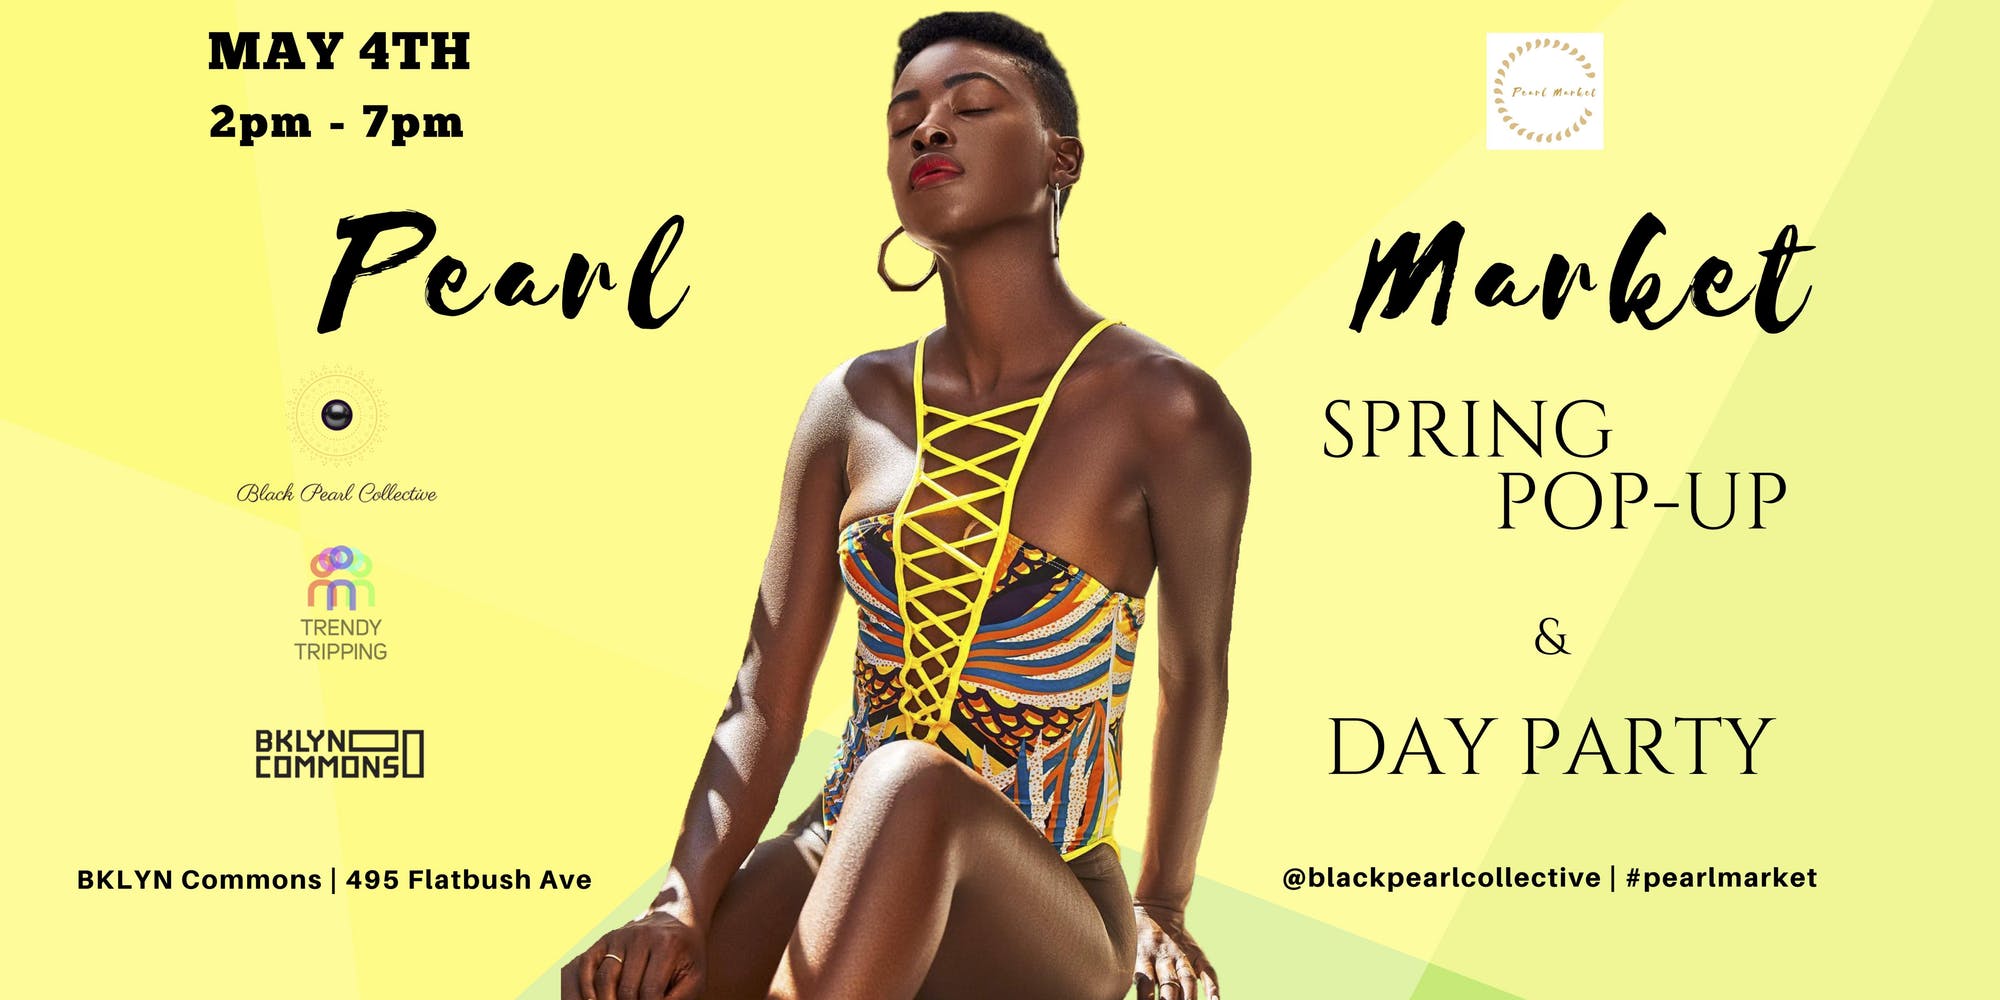 PEARL MARKET SPRING POP-UP & DAY PART